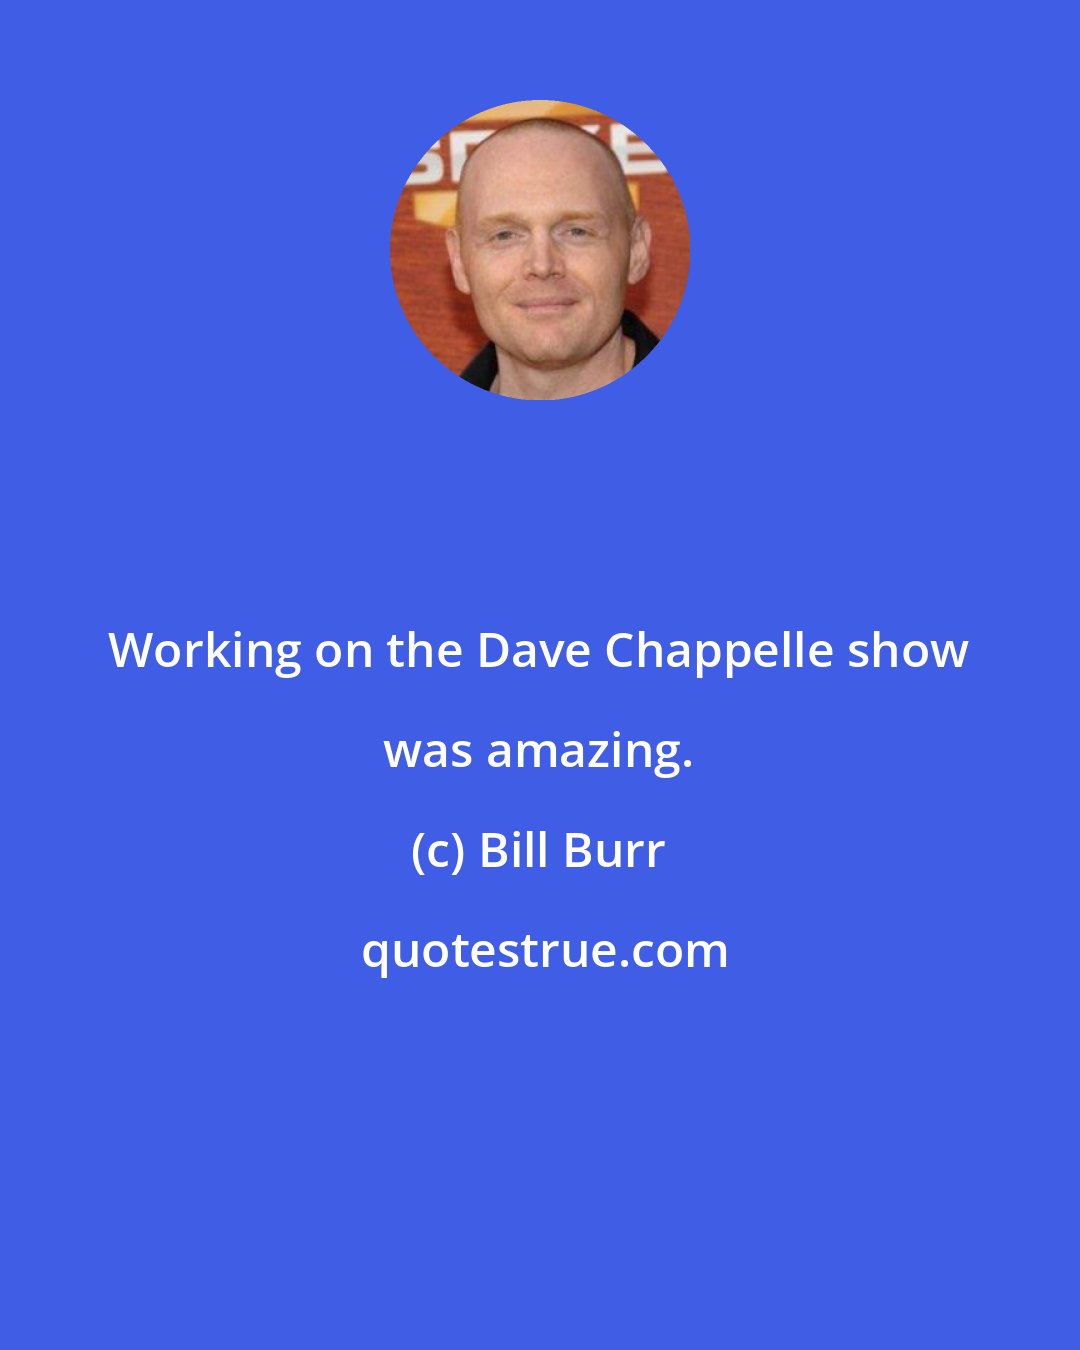 Bill Burr: Working on the Dave Chappelle show was amazing.